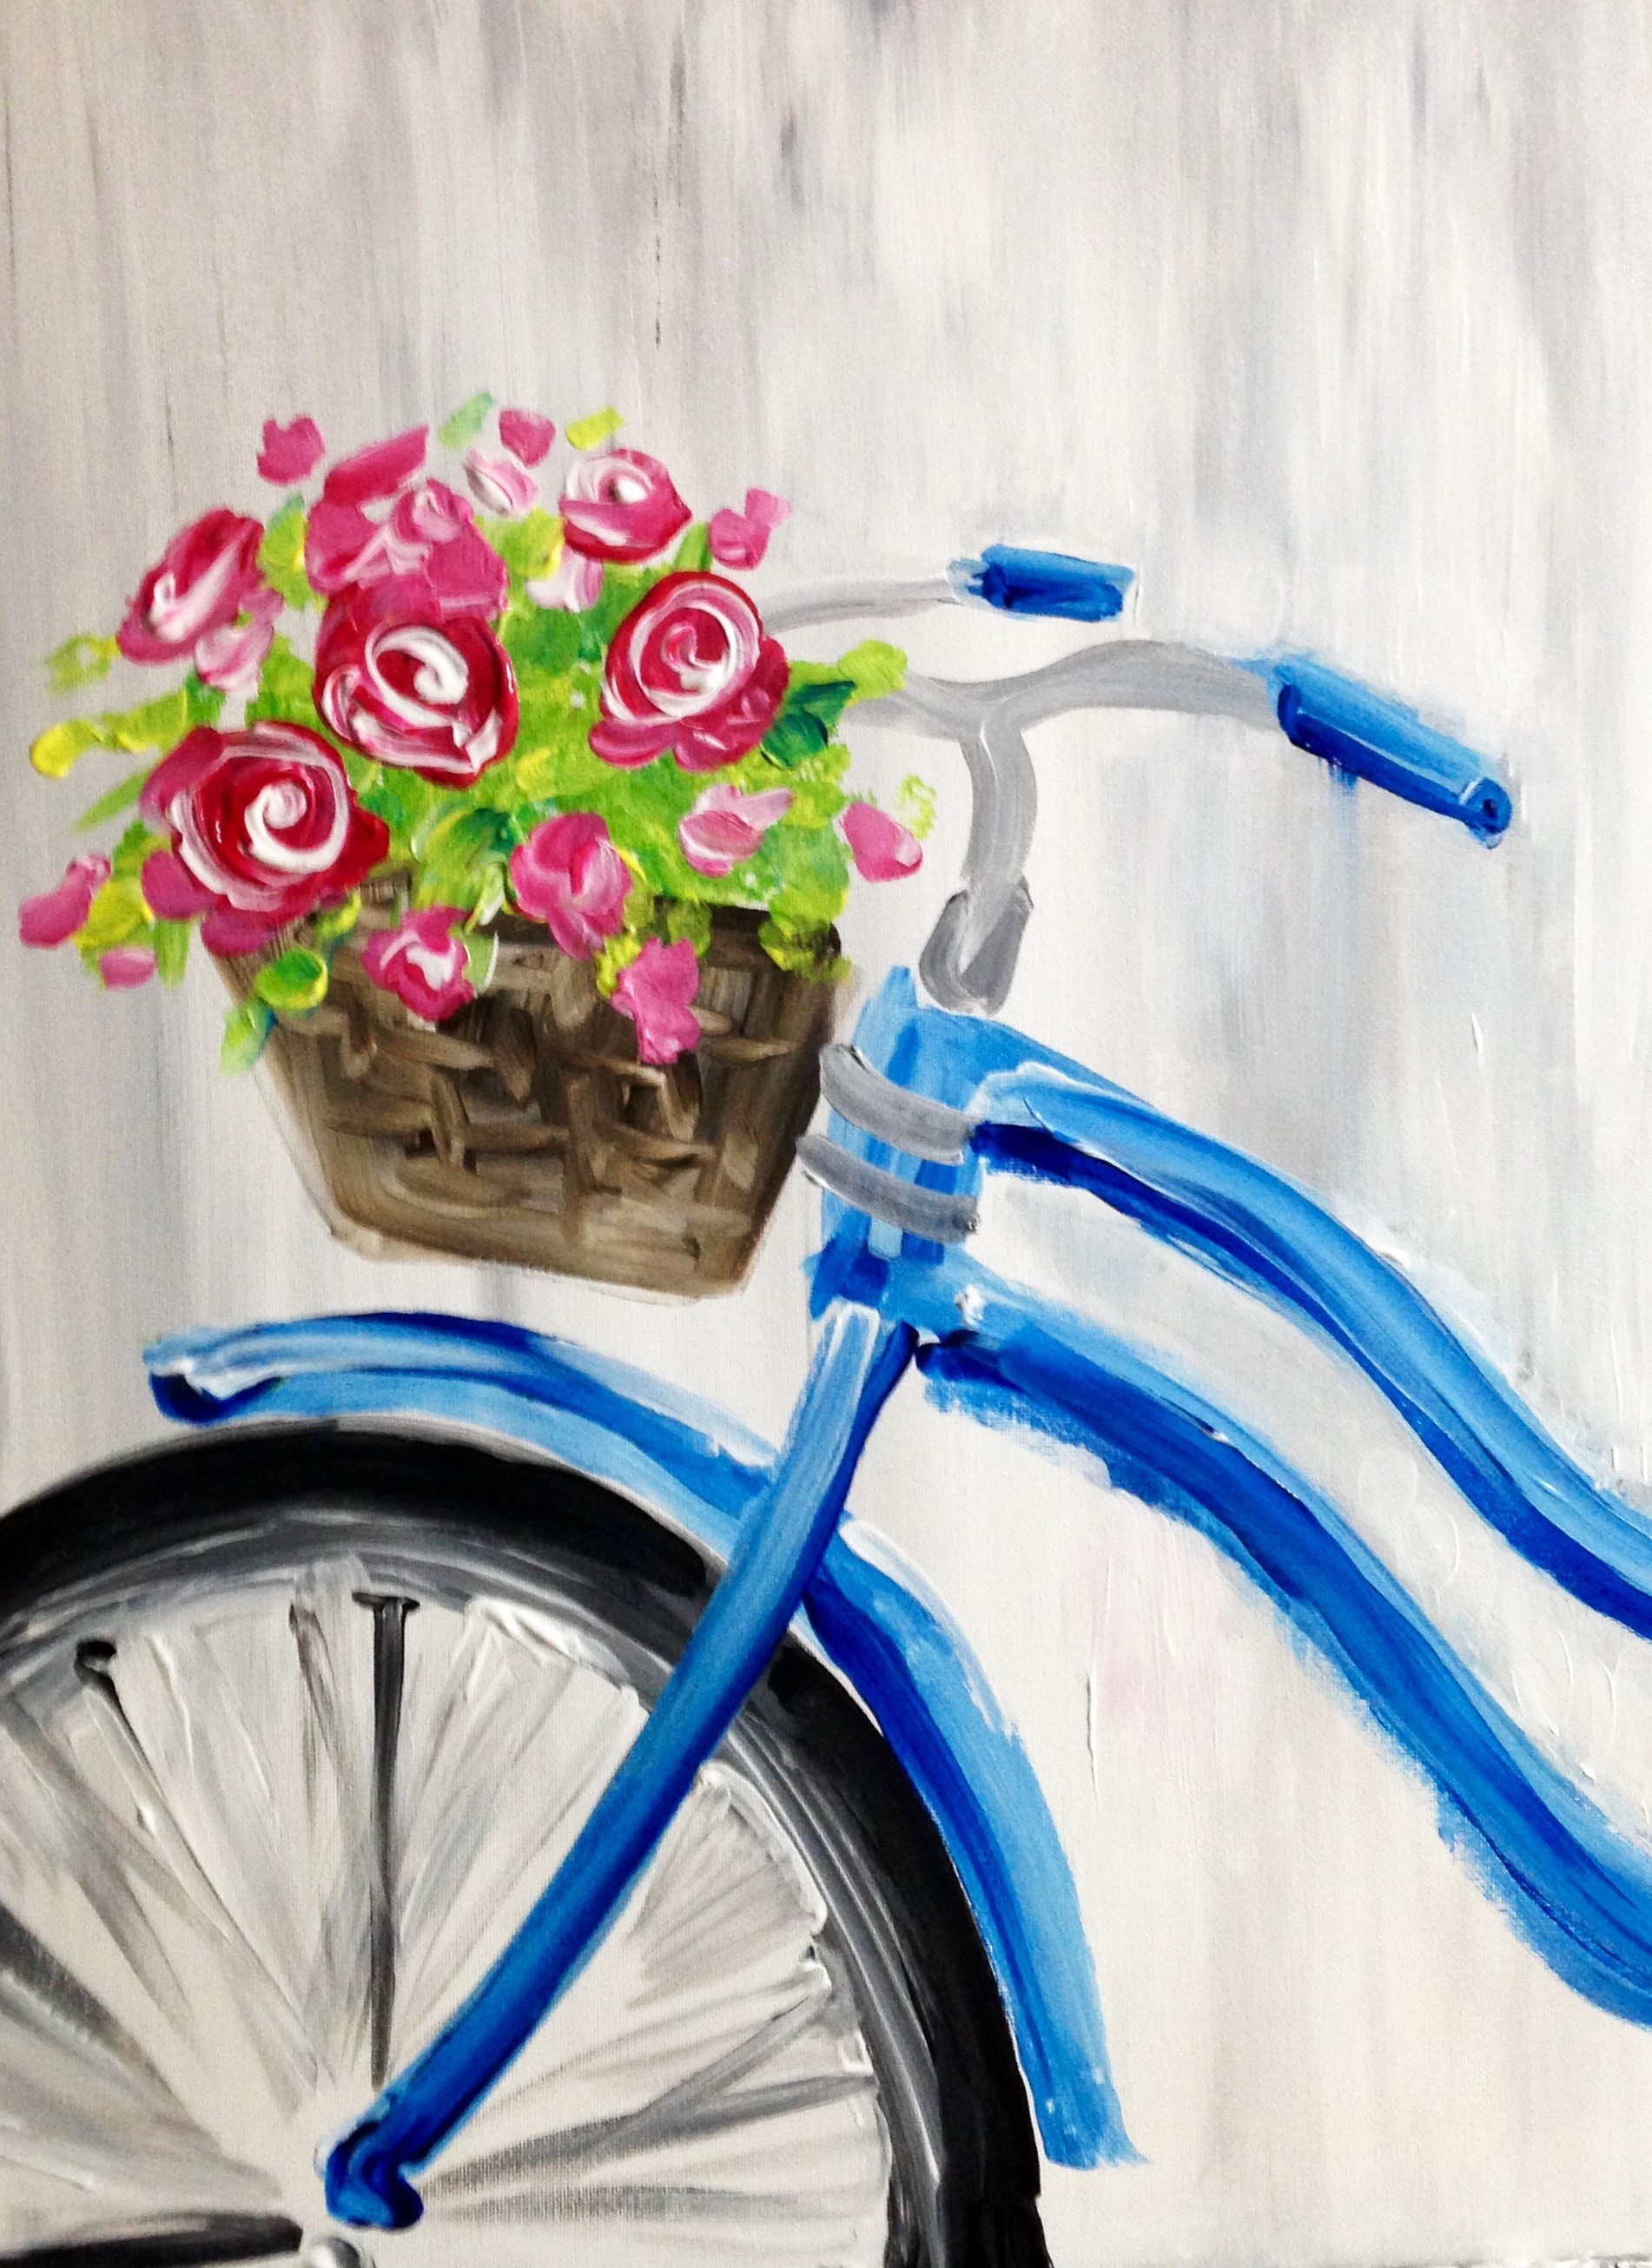 Bicycle painting photo